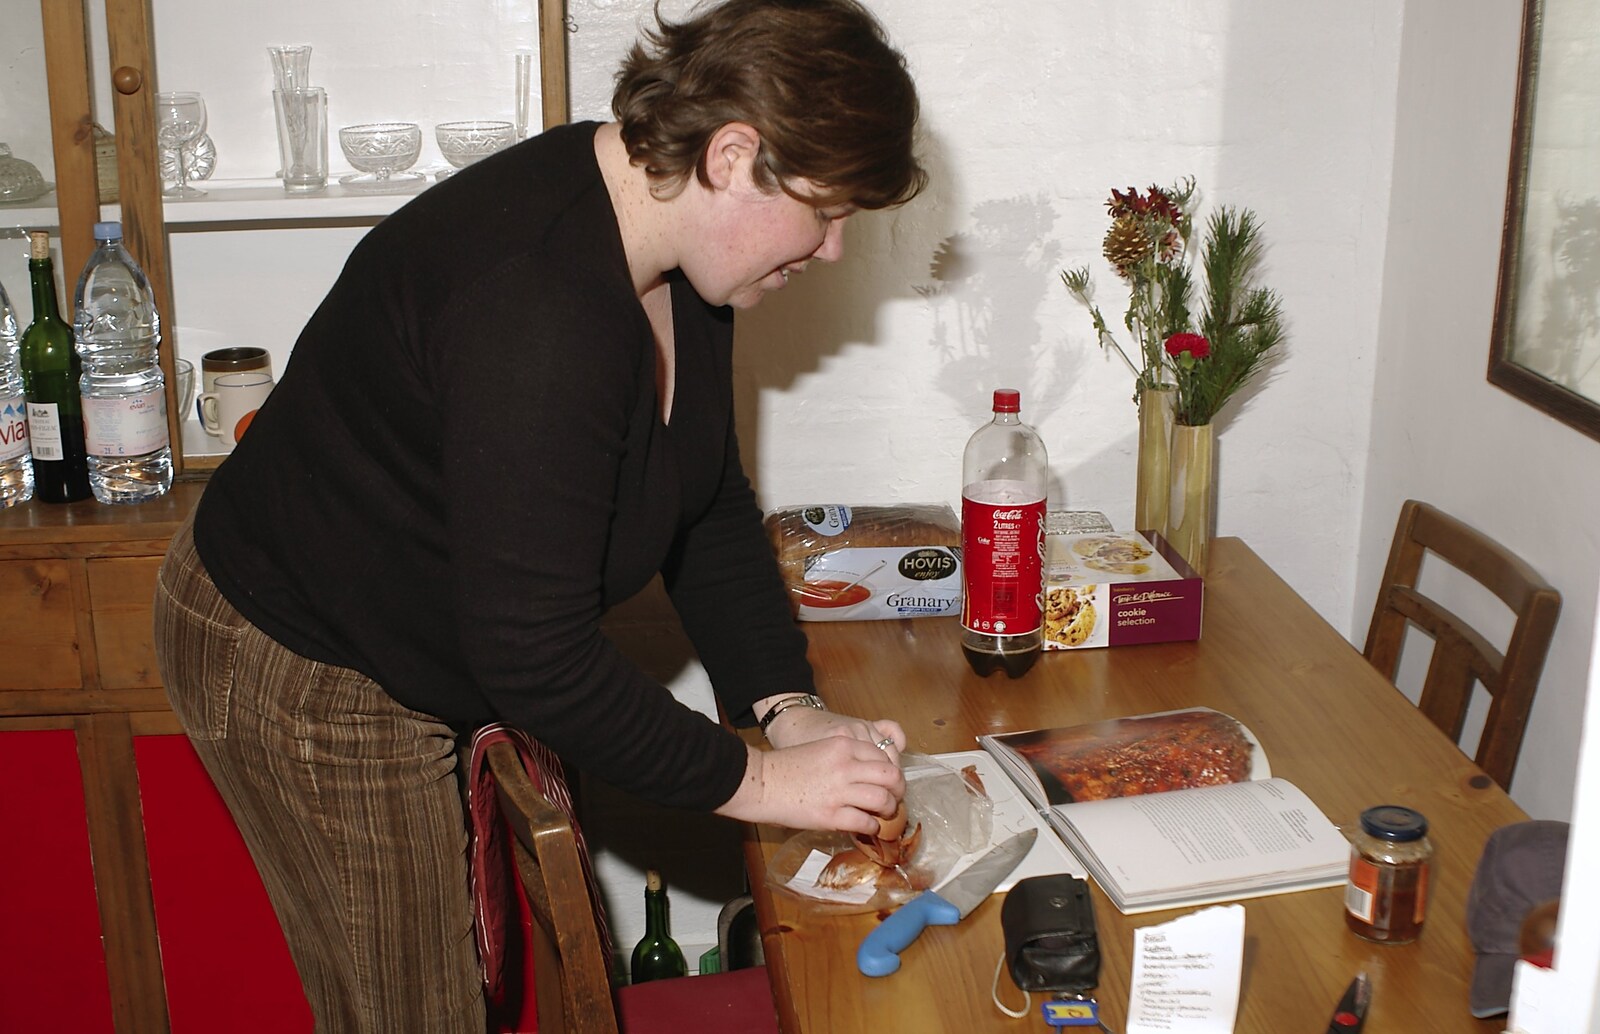 Sis reads a recipe from A Day with Sis, Matt and the Old Man, Saxmundham, Suffolk - 28th December 2004